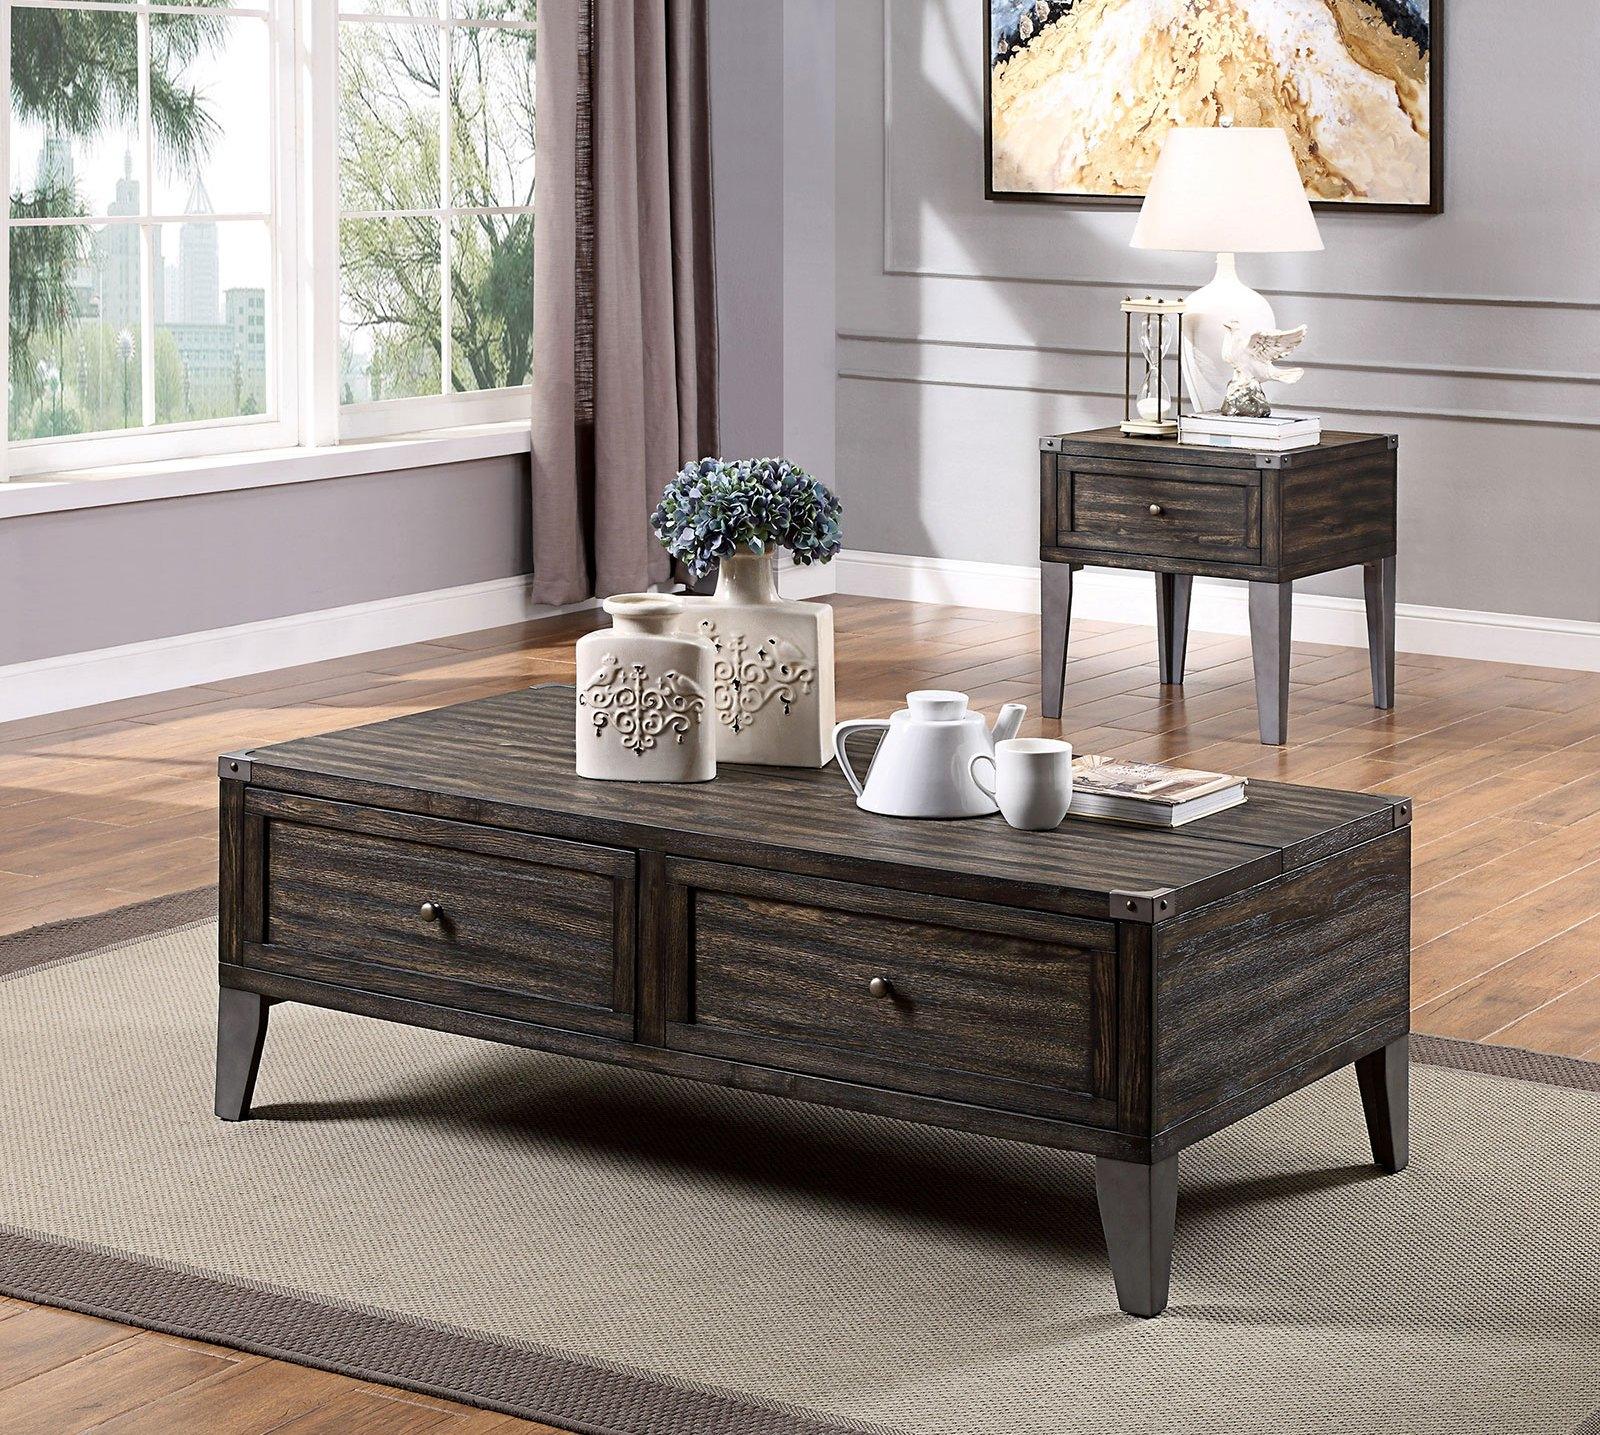 Transitional Coffee Table and 2 End Tables CM4387C-3PC Piedmont CM4387C-3PC in Dark Oak 